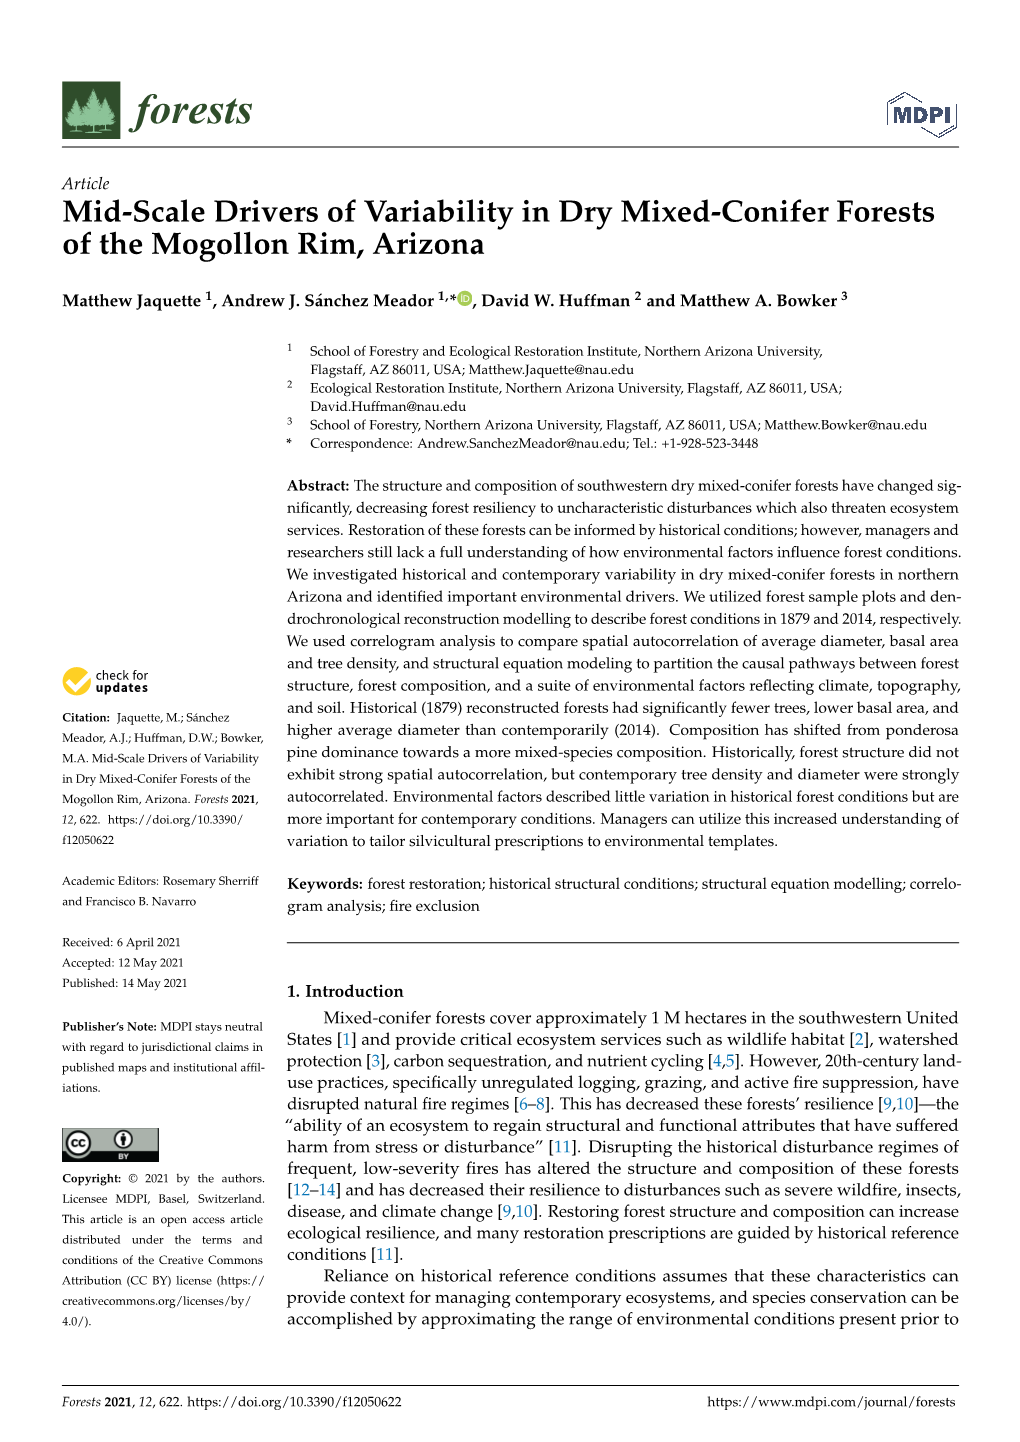 Mid-Scale Drivers of Variability in Dry Mixed-Conifer Forests of the Mogollon Rim, Arizona